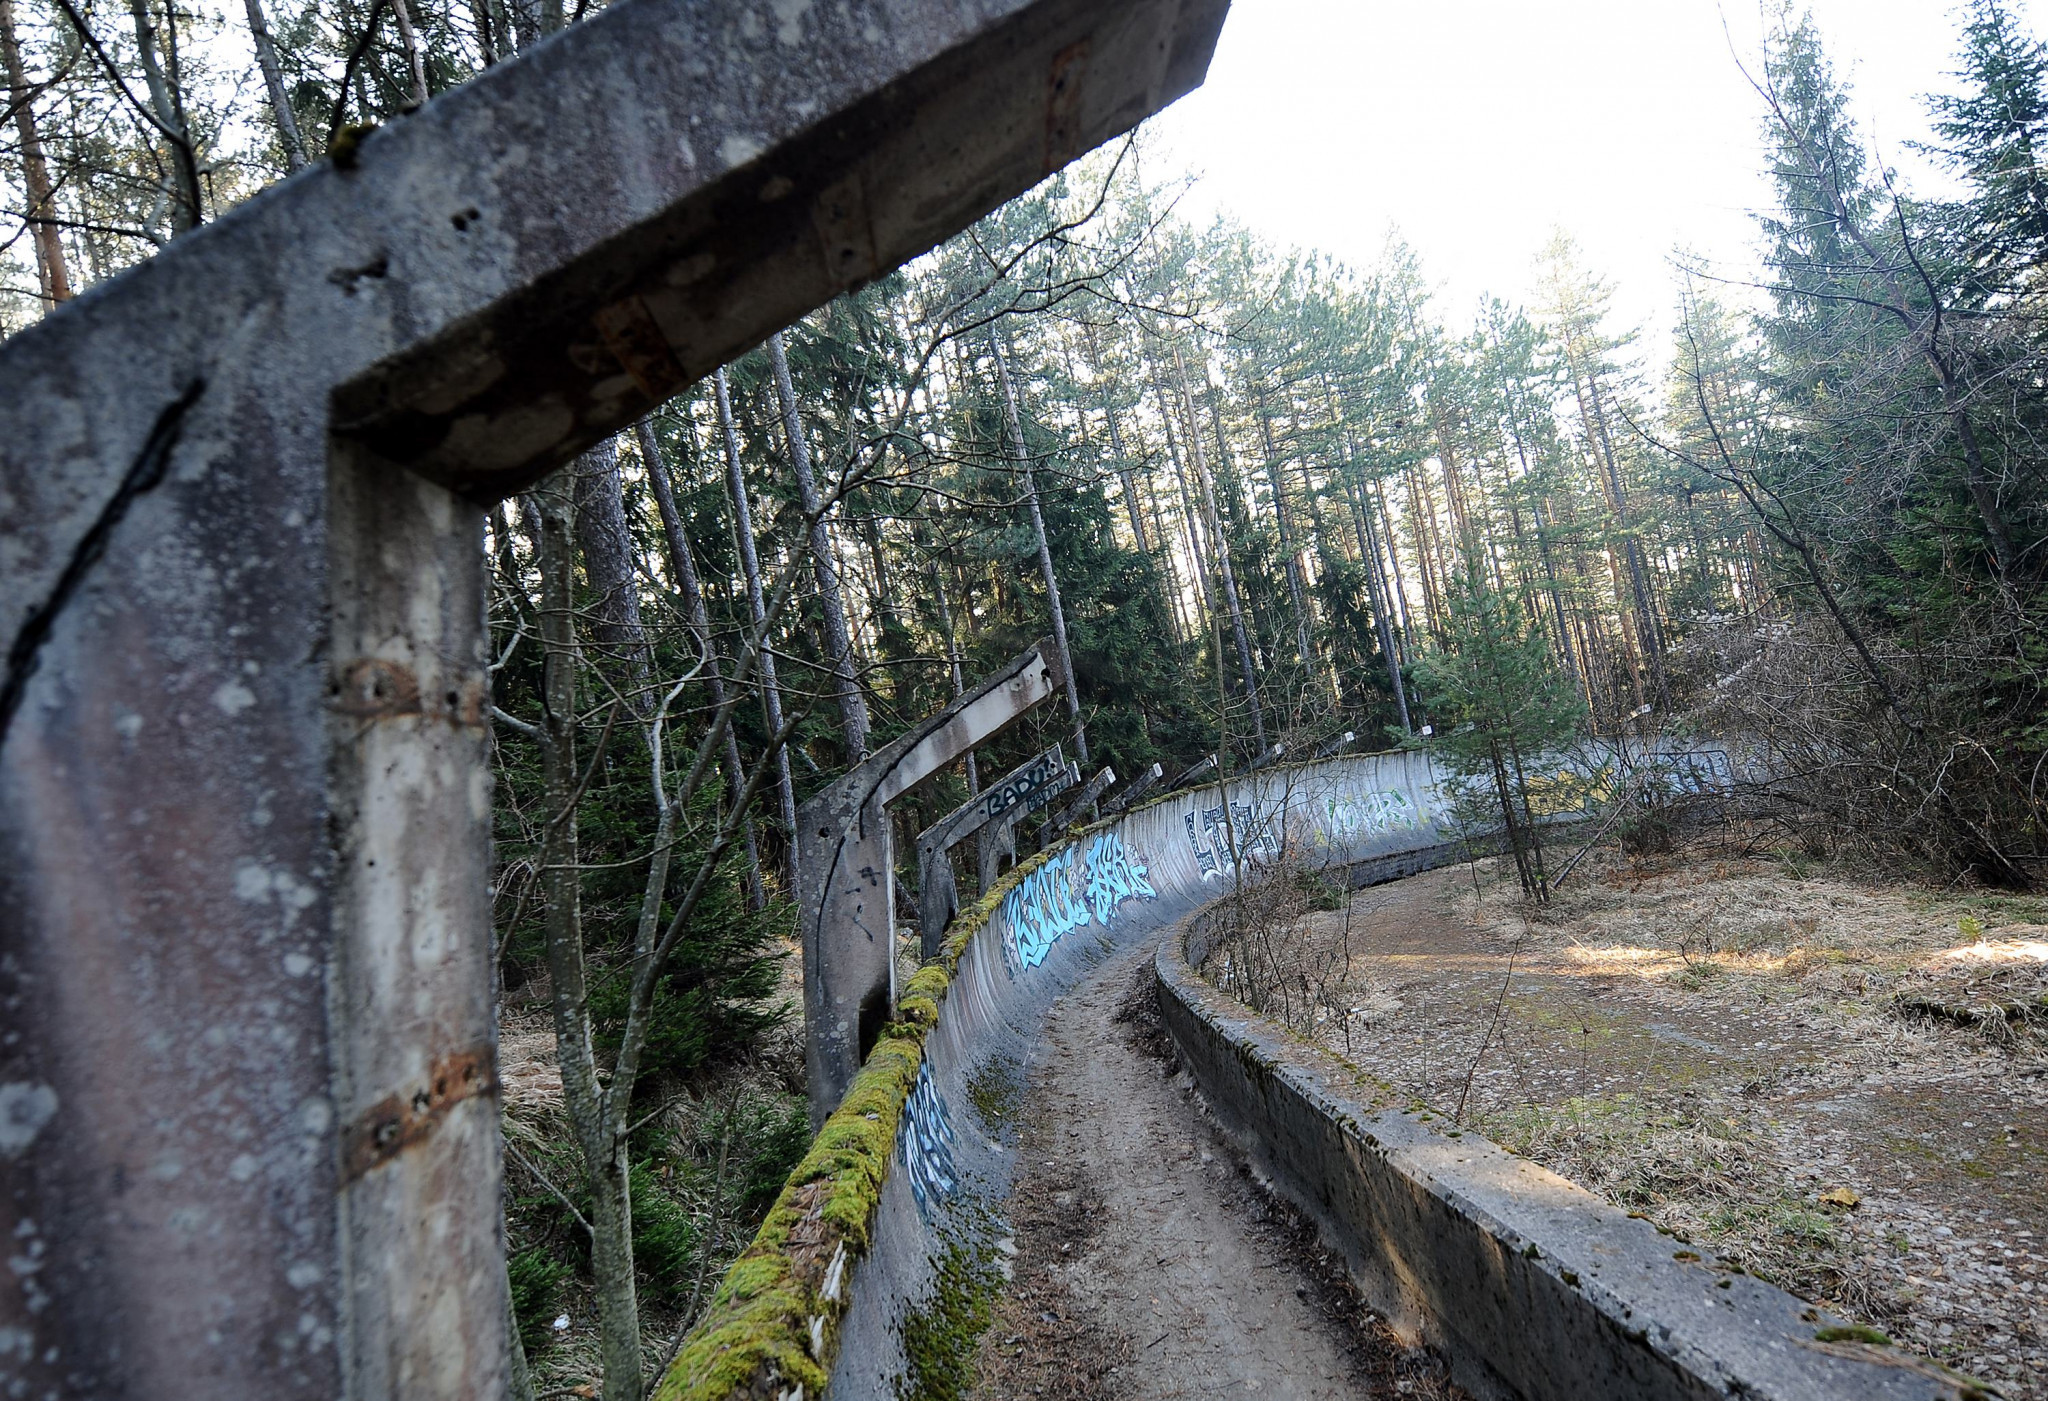 The bobsleigh track at Trebevic built for the 1984 Winter Olympics in Sarajevo suffered terrible Balkan War damage but could figure in Pyrenees Barcelona bid for 2032 ©Getty Images
